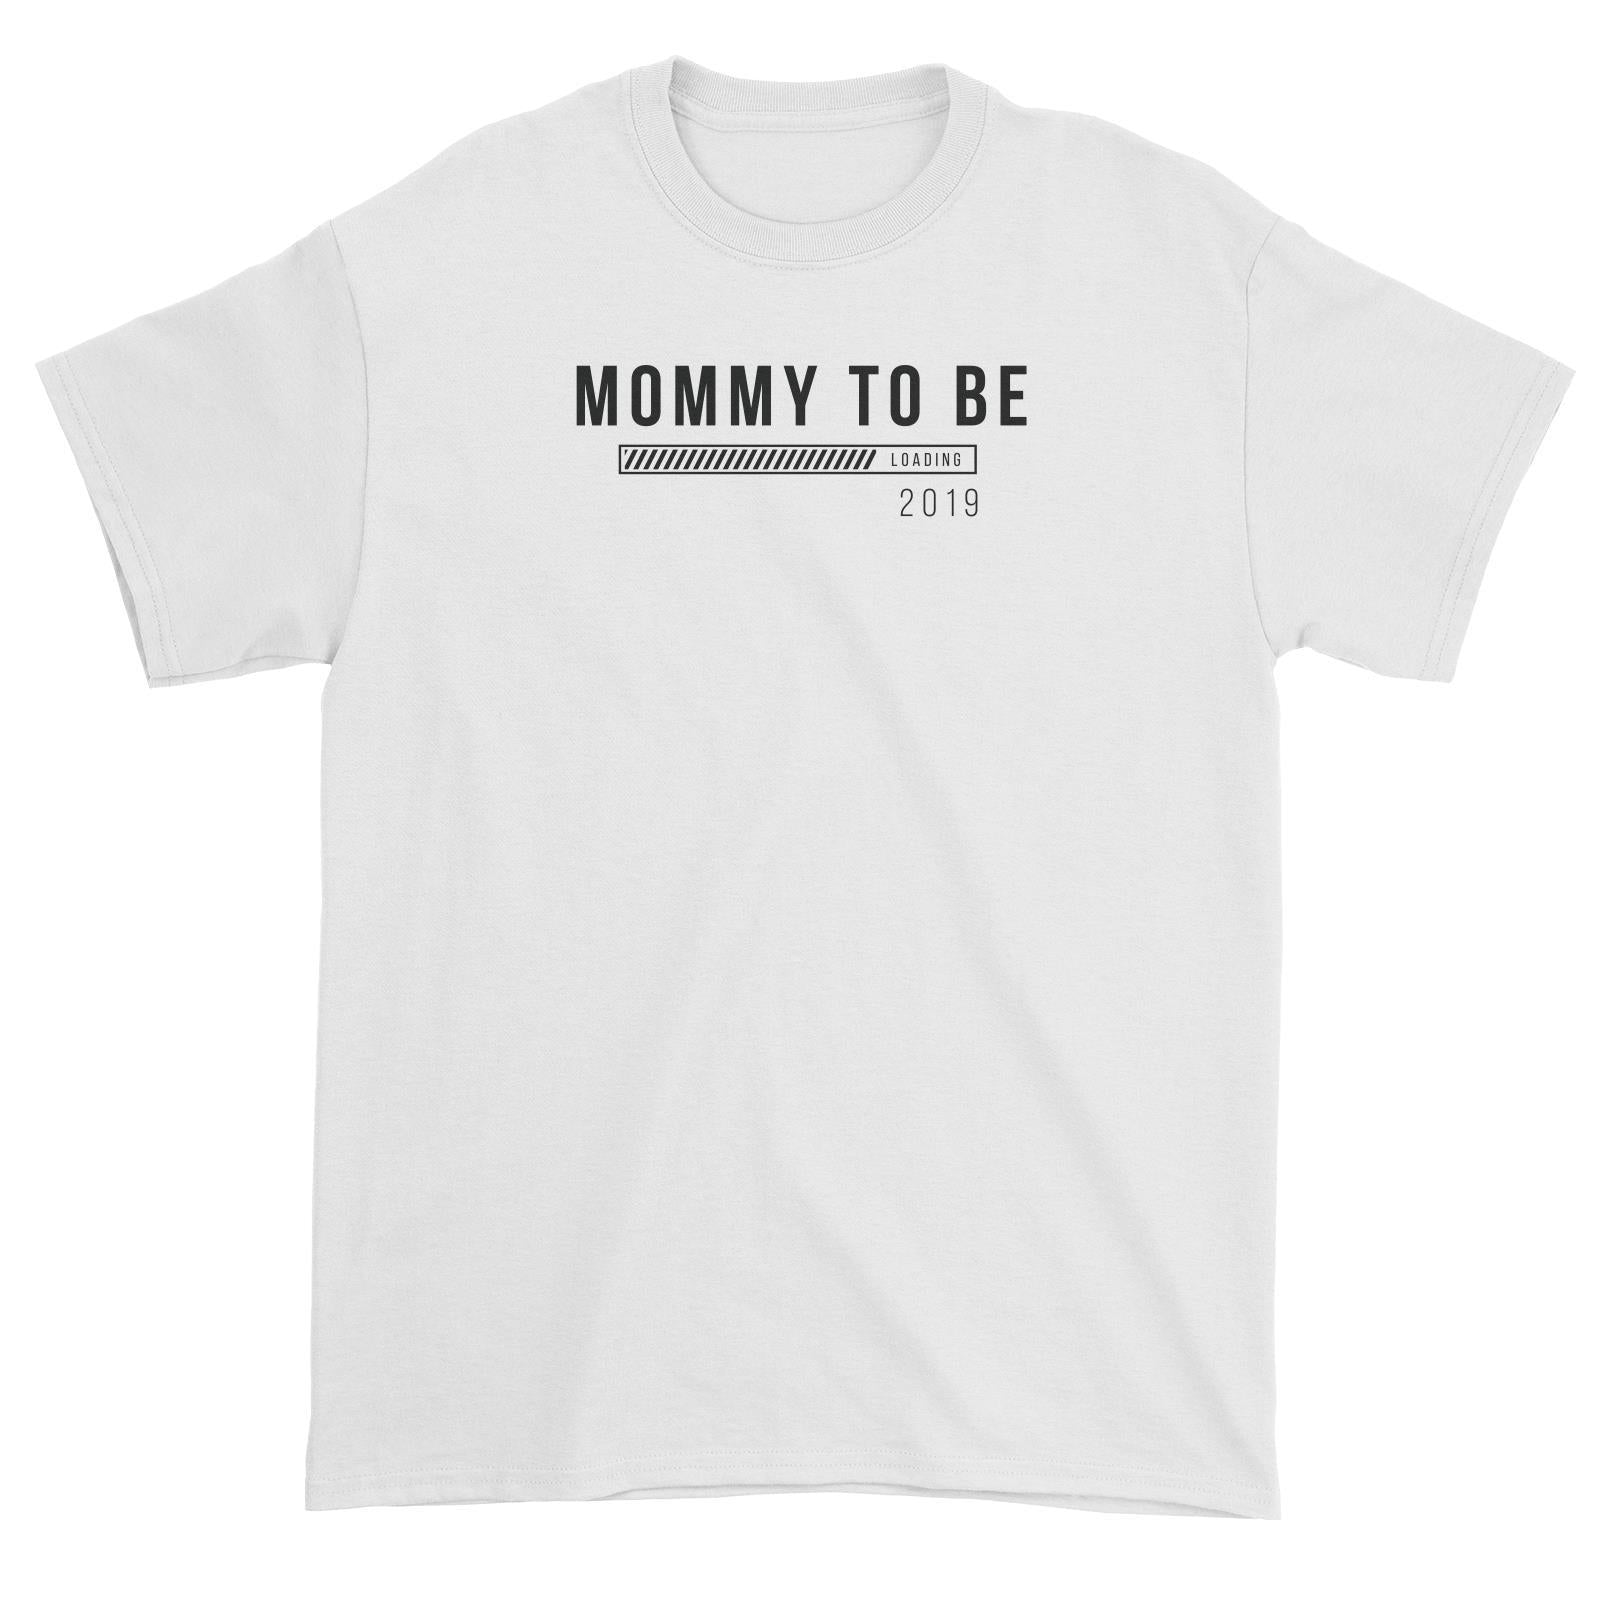 Coming Soon Family Mommy To Be Loading Add Date Unisex T-Shirt